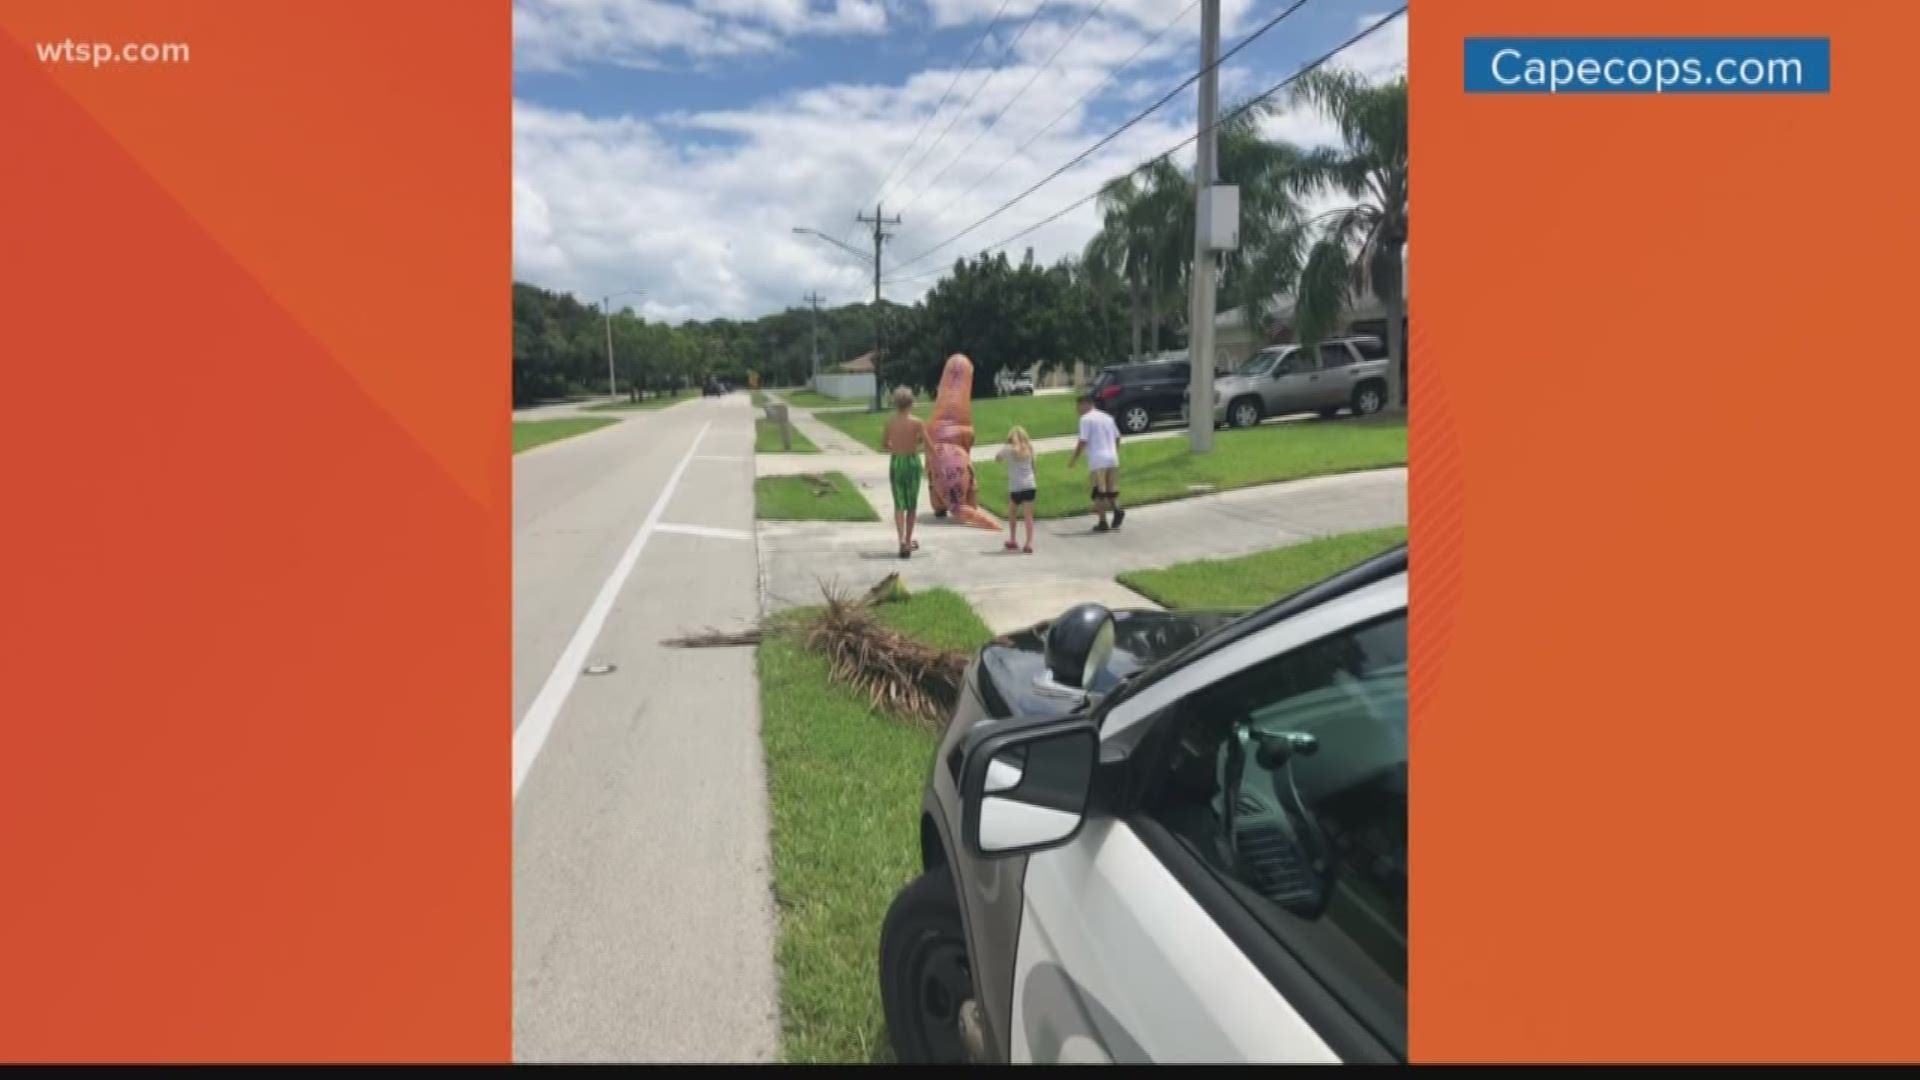 Cape Coral police had an interesting day arresting a dinosaur!